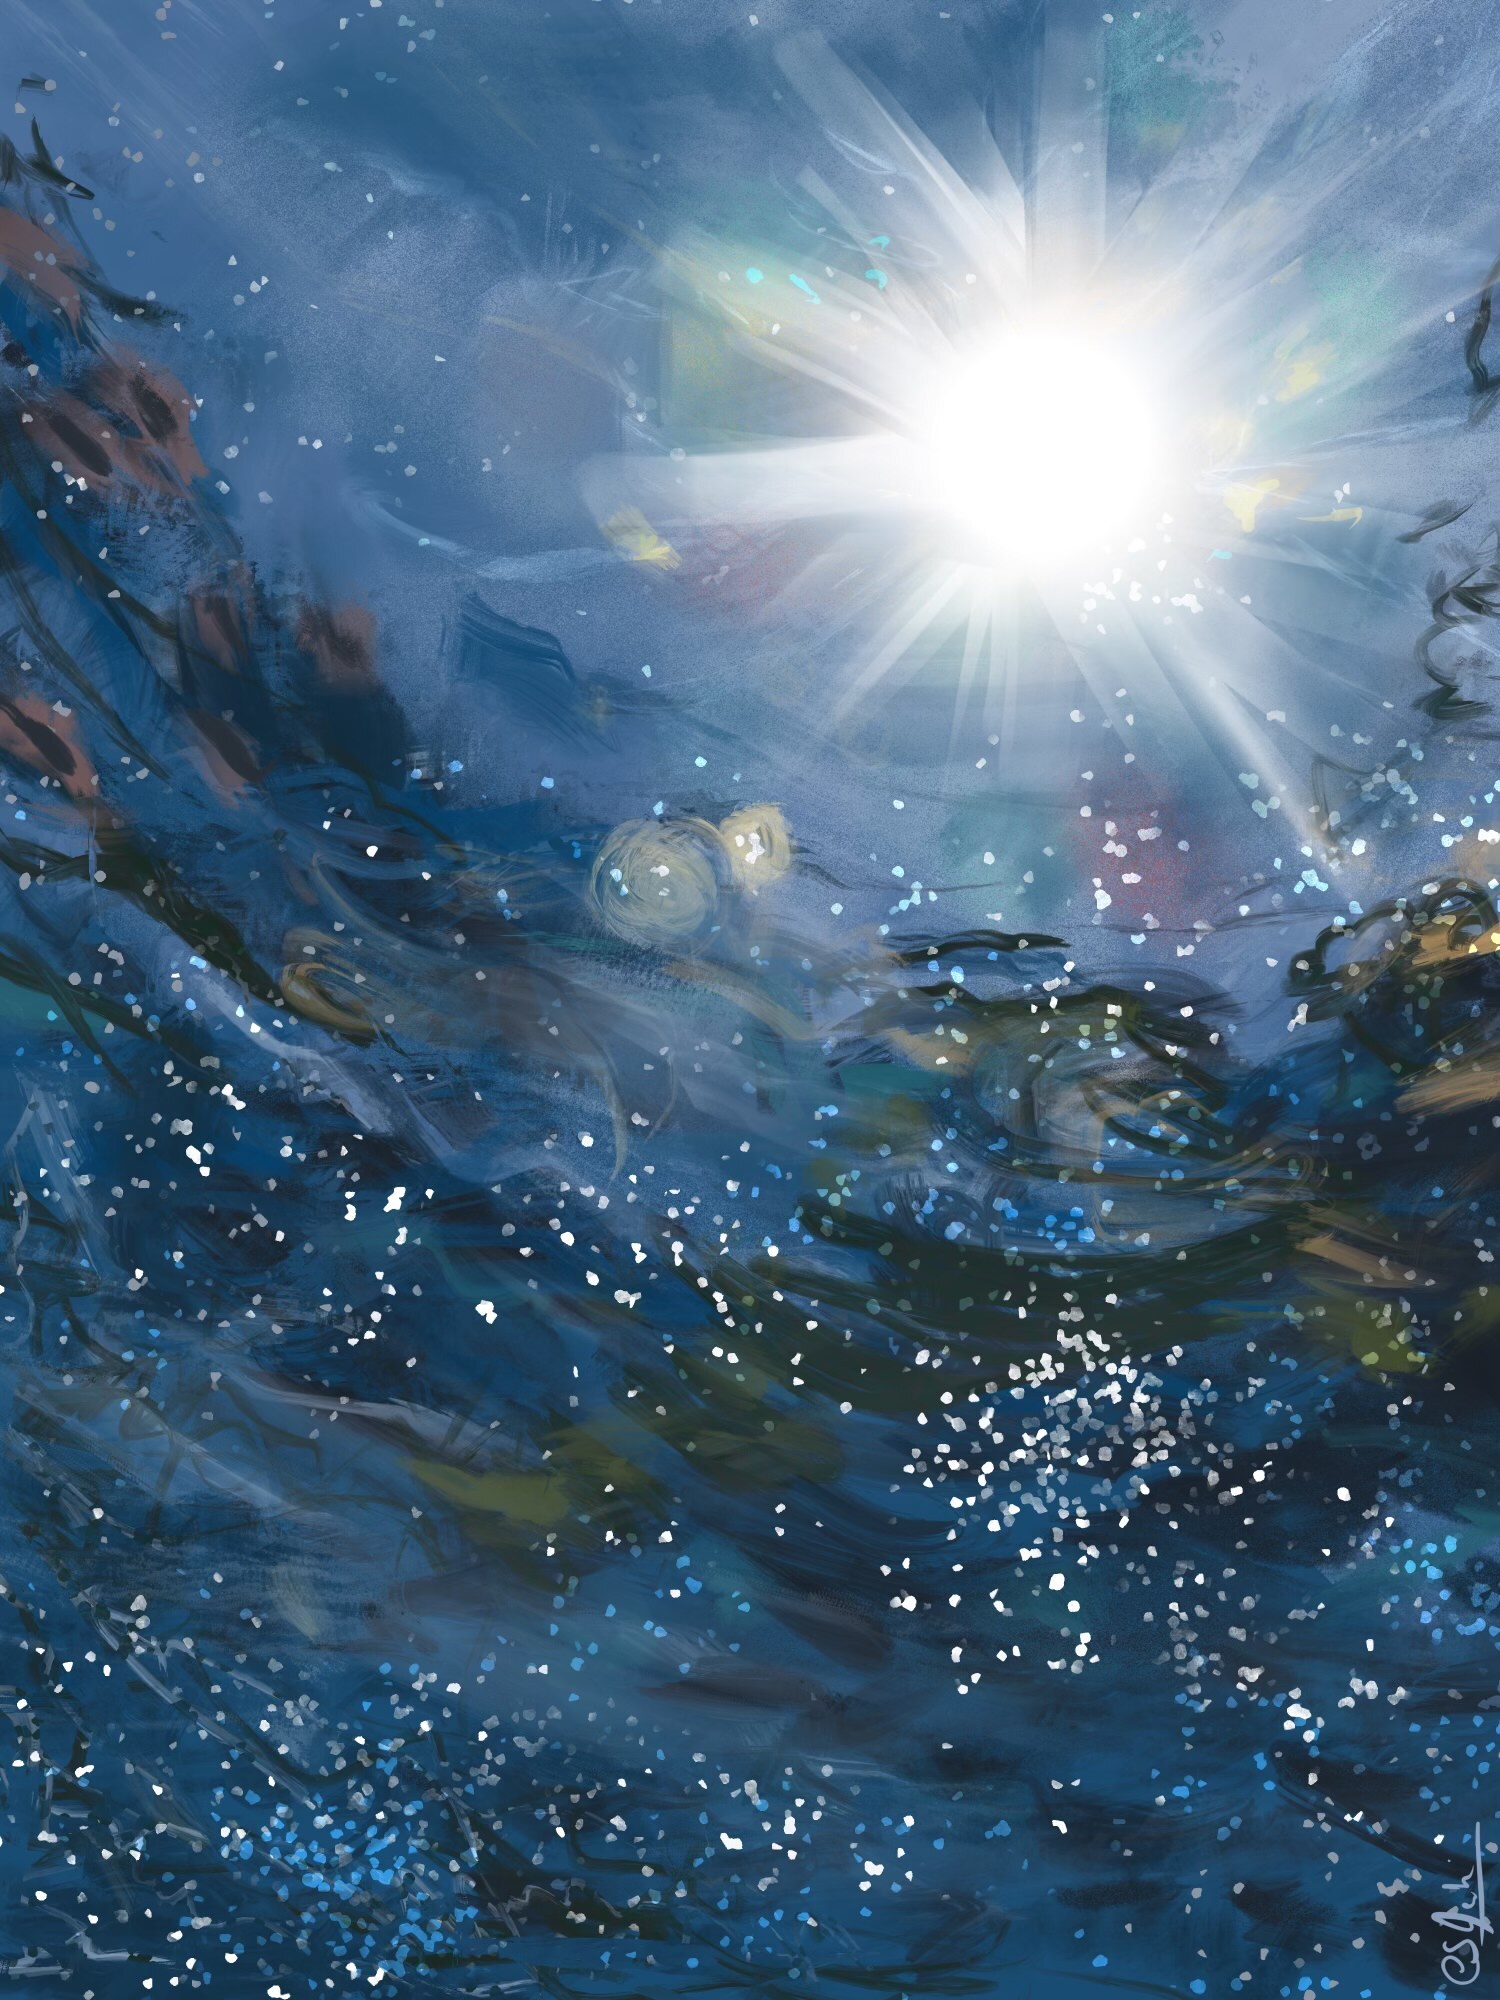 A painting of looking upward through a colourful body of water towards the sun shining through above.